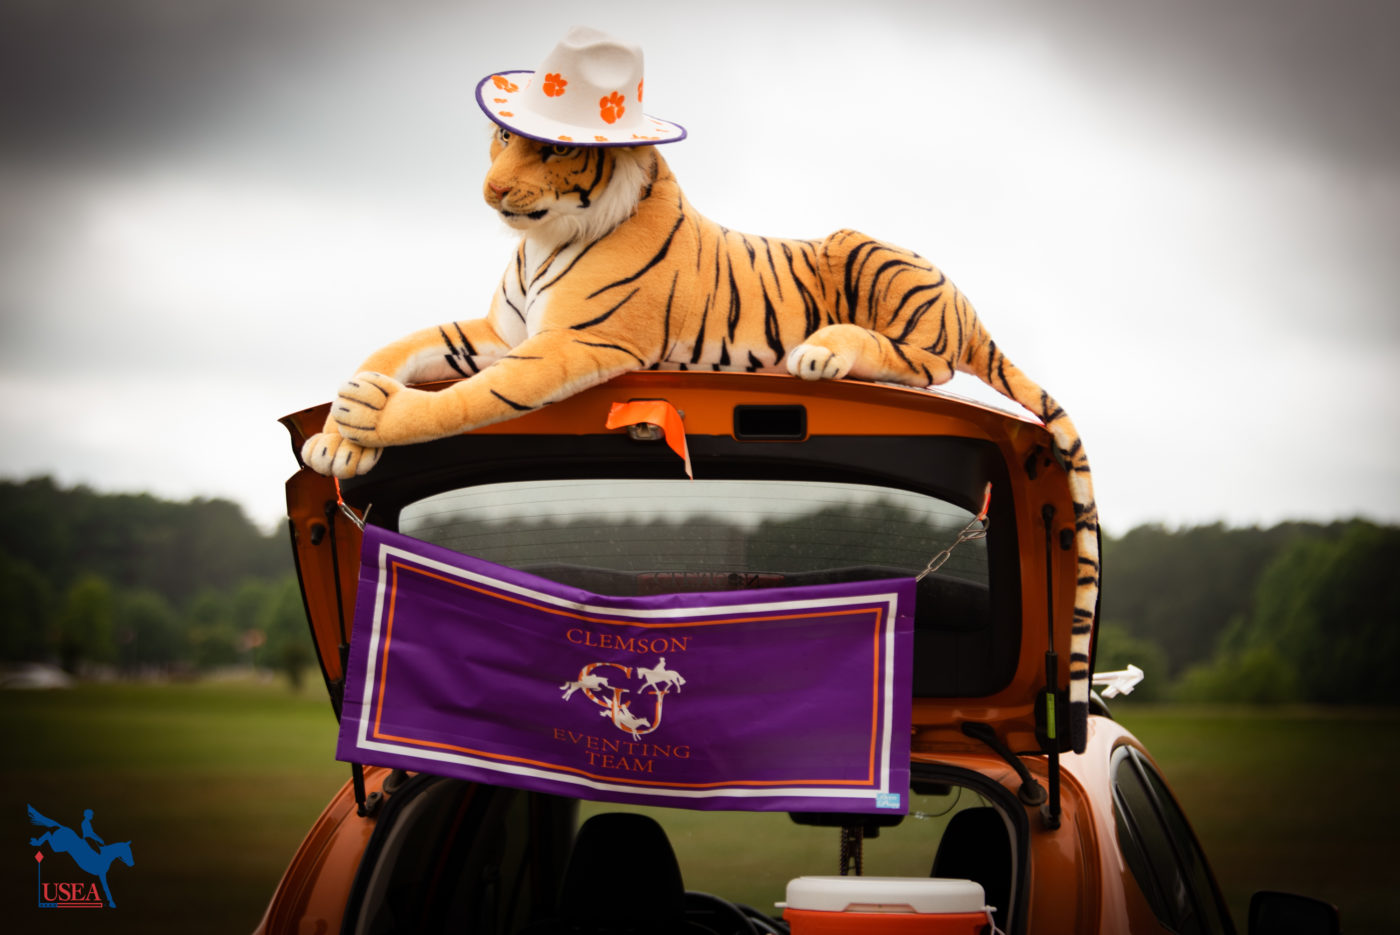 Clemson had a special mascot watching over cross-country. USEA/ Meagan DeLisle photo